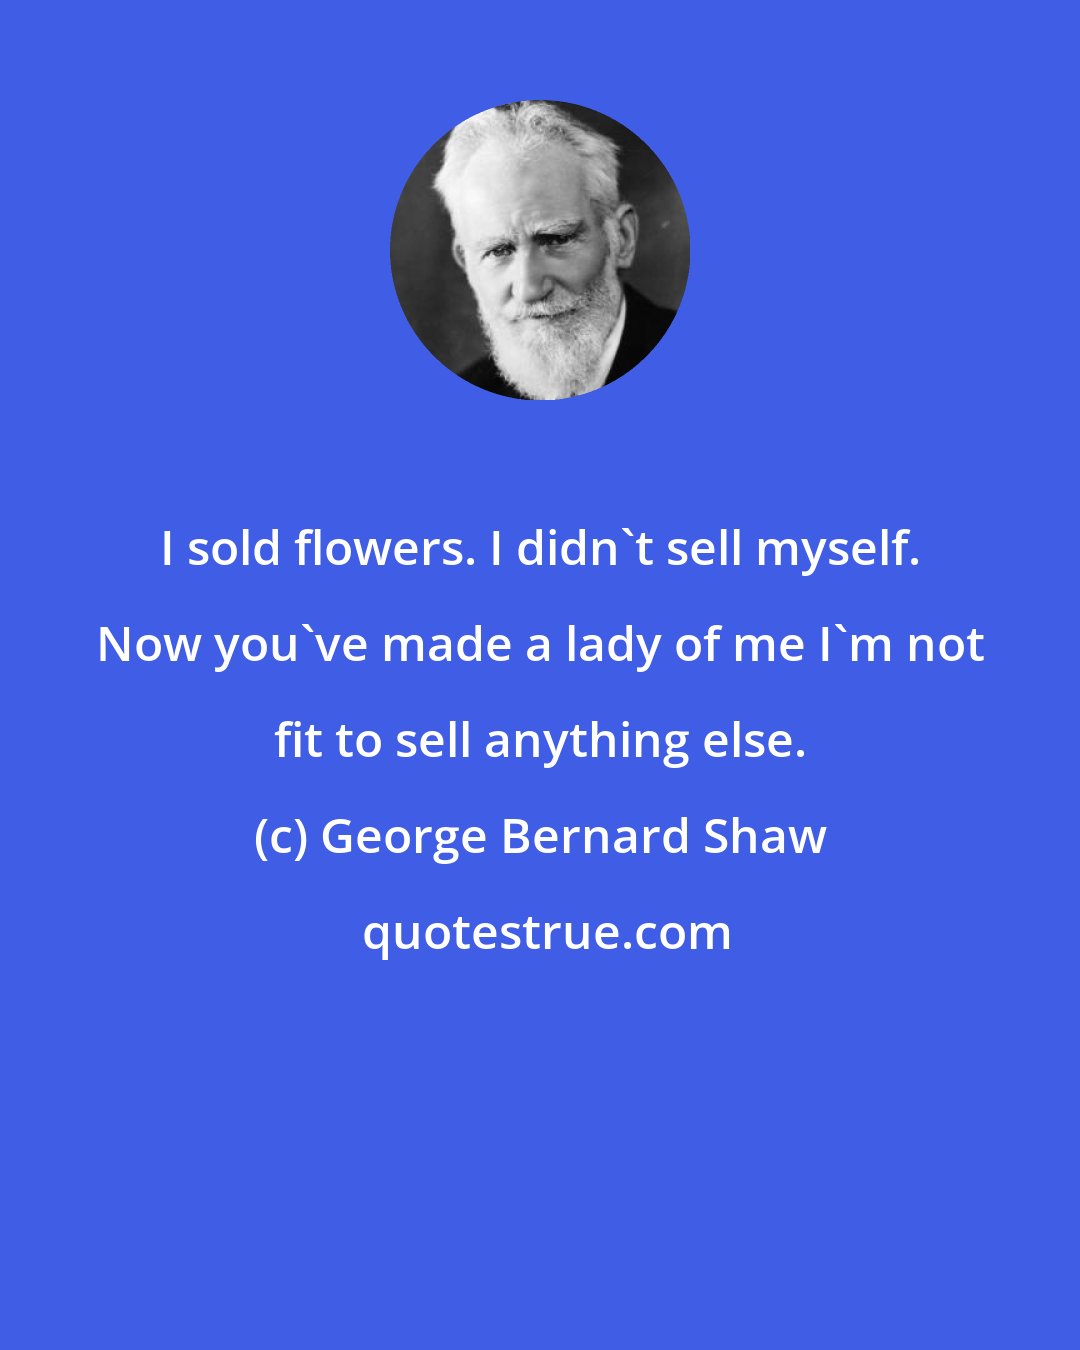 George Bernard Shaw: I sold flowers. I didn't sell myself. Now you've made a lady of me I'm not fit to sell anything else.